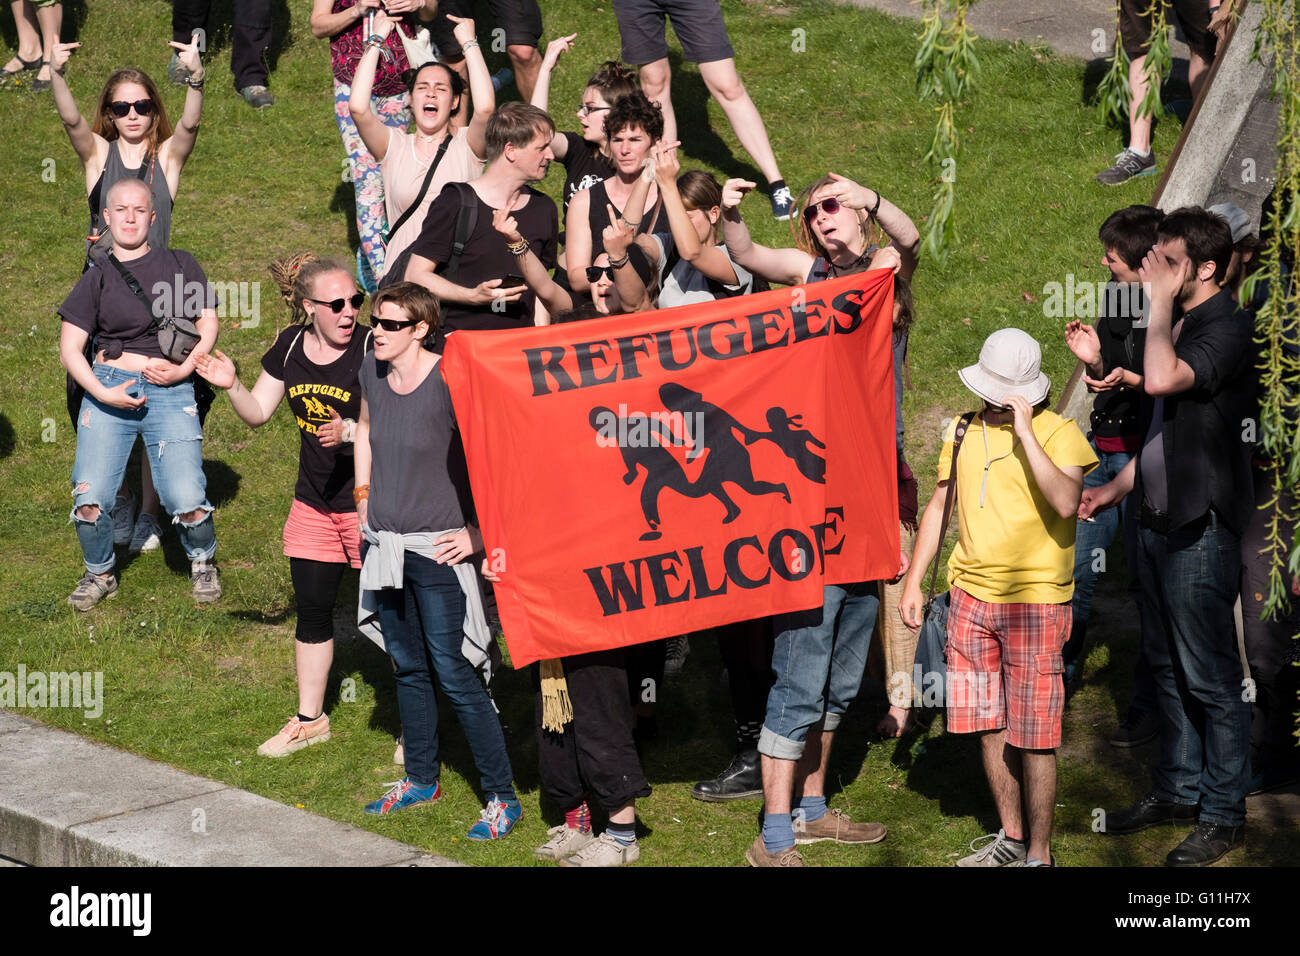 Berlin, Germany. 7th May 2016. Pro-refugee protesters stage counter demonstration against  far -right demonstrators in Berlin Germany. Far-right protesters were demonstrating against islam, refugees and Angela Merkel in Mitte Berlin. Protestors demanded that Chancellor Angela Merkel stand down because of allowing large numbers of refugees and migrants to enter Germany. Credit:  Iain Masterton/Alamy Live News Stock Photo